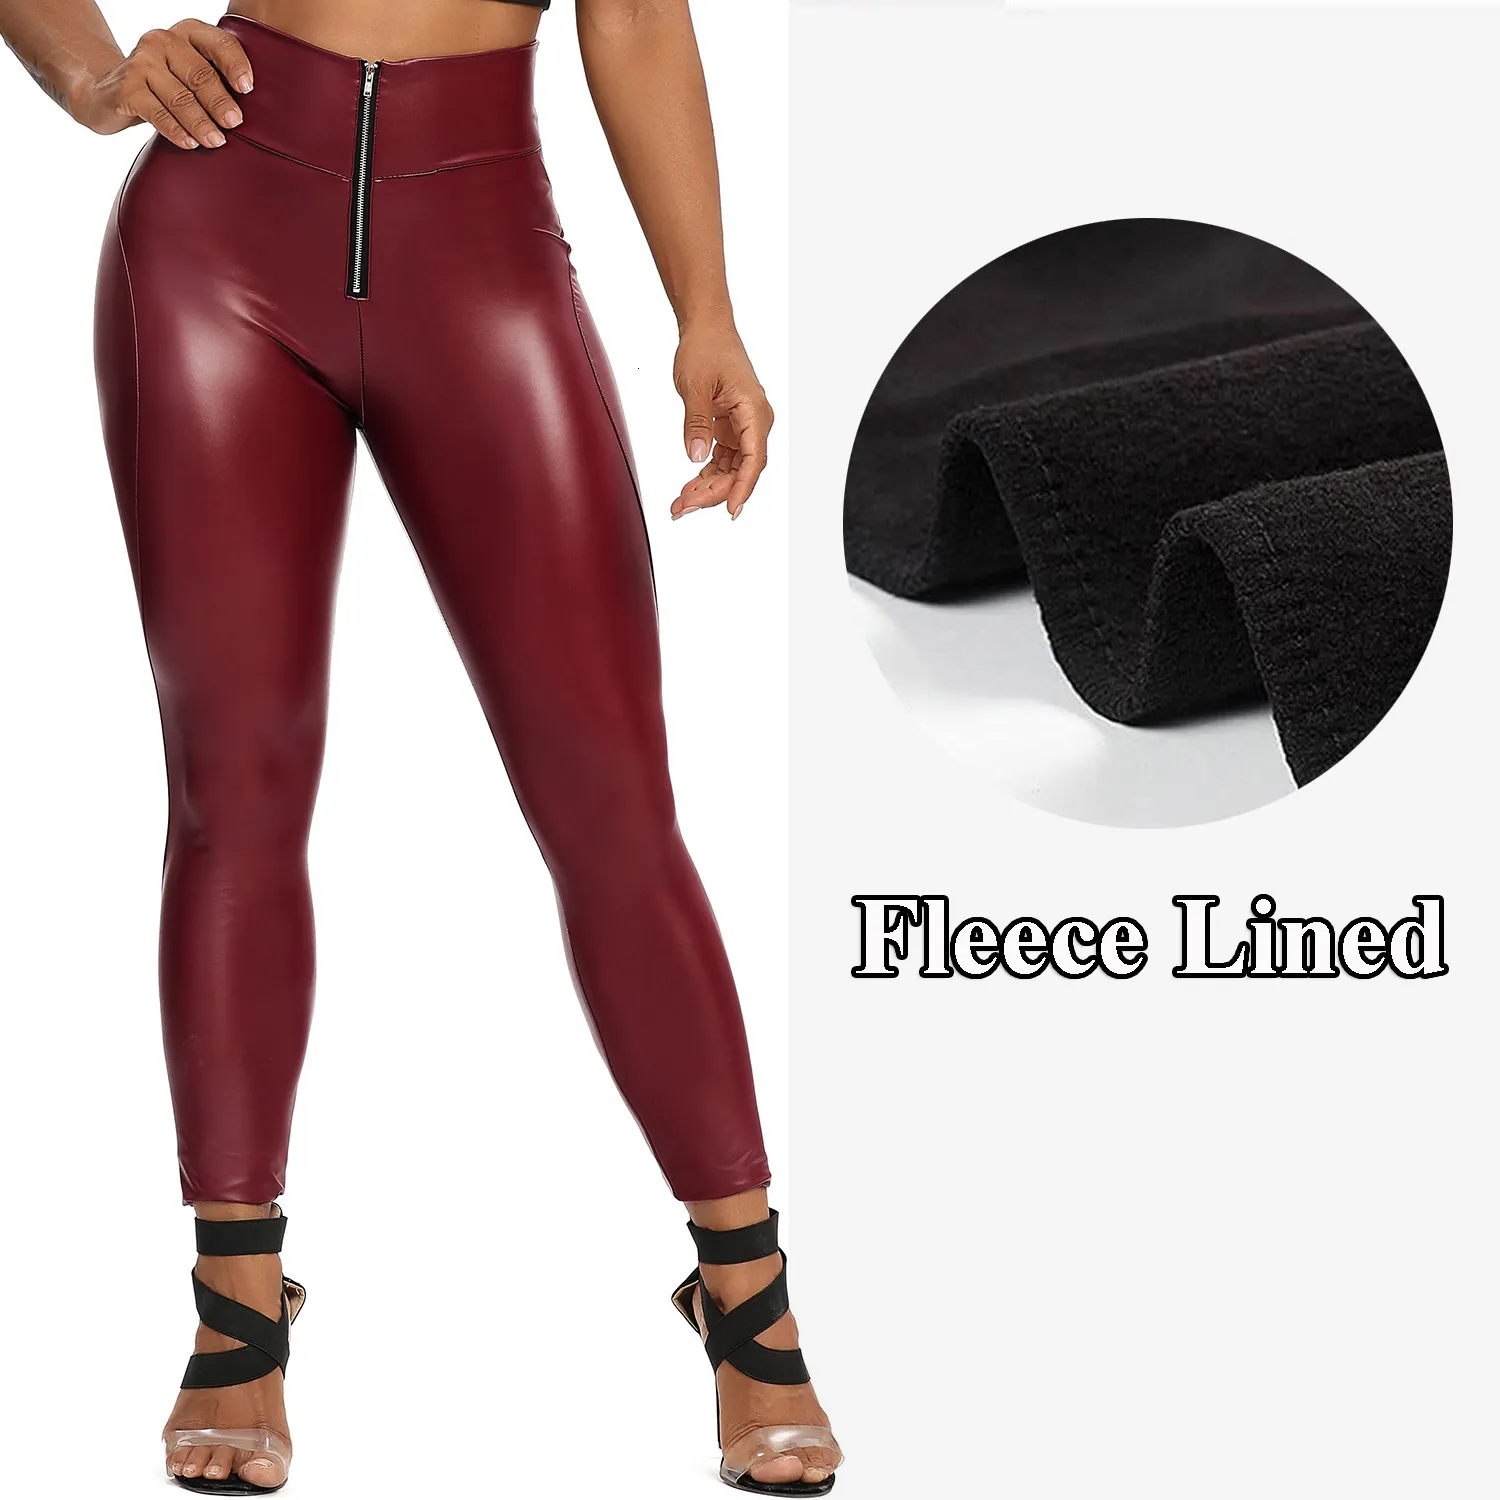 Fleece Lined High Waisted Faux Leather Leggings - Five Inch Waist Band -  92% Polyester / 8% Spandex, 7319963